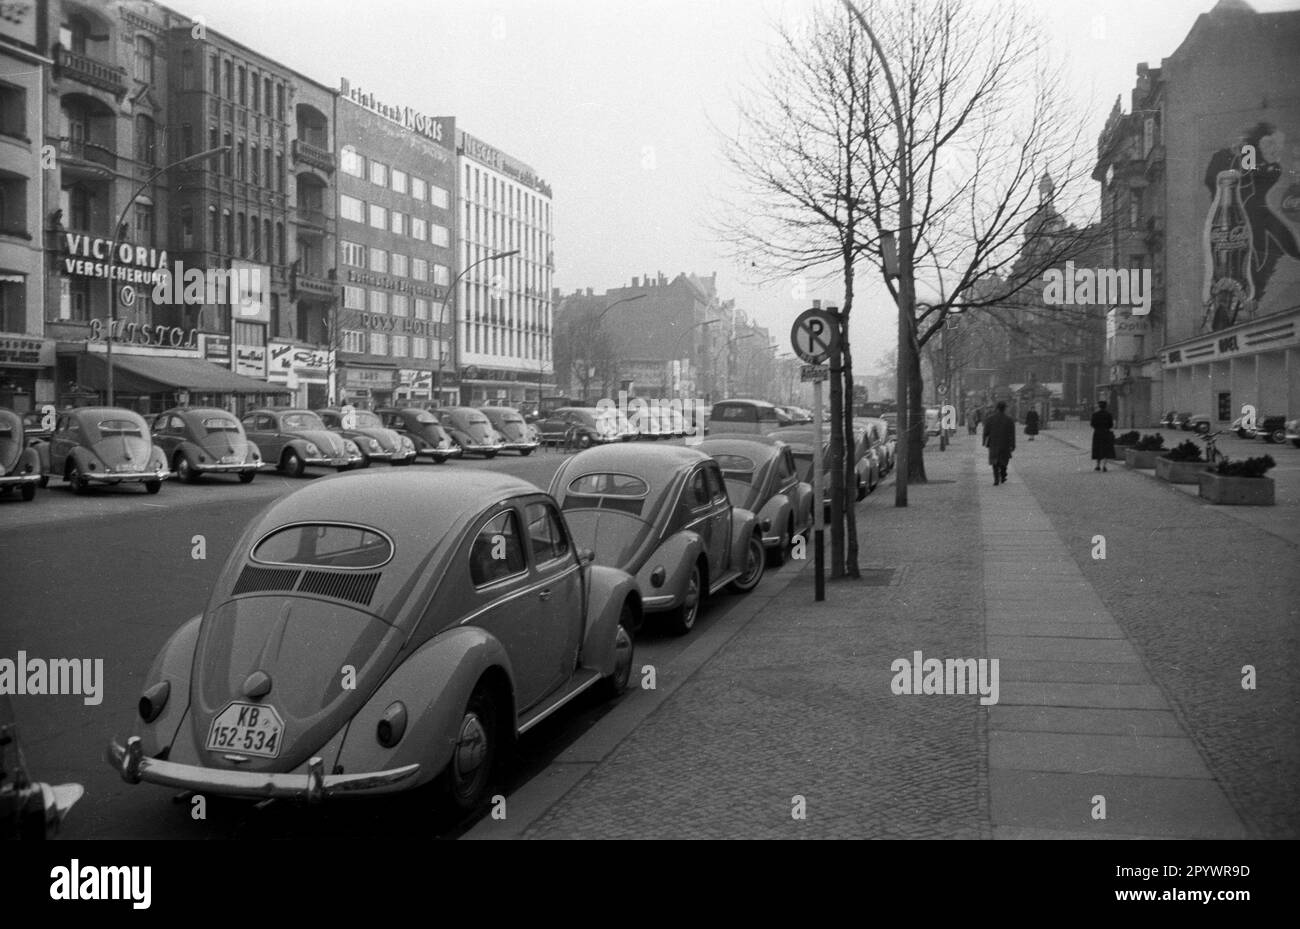 Parking VW Beetle on a street in West Berlin. The model with the oval rear window is nicknamed Ovali. Undated photo from around 1953 Stock Photo